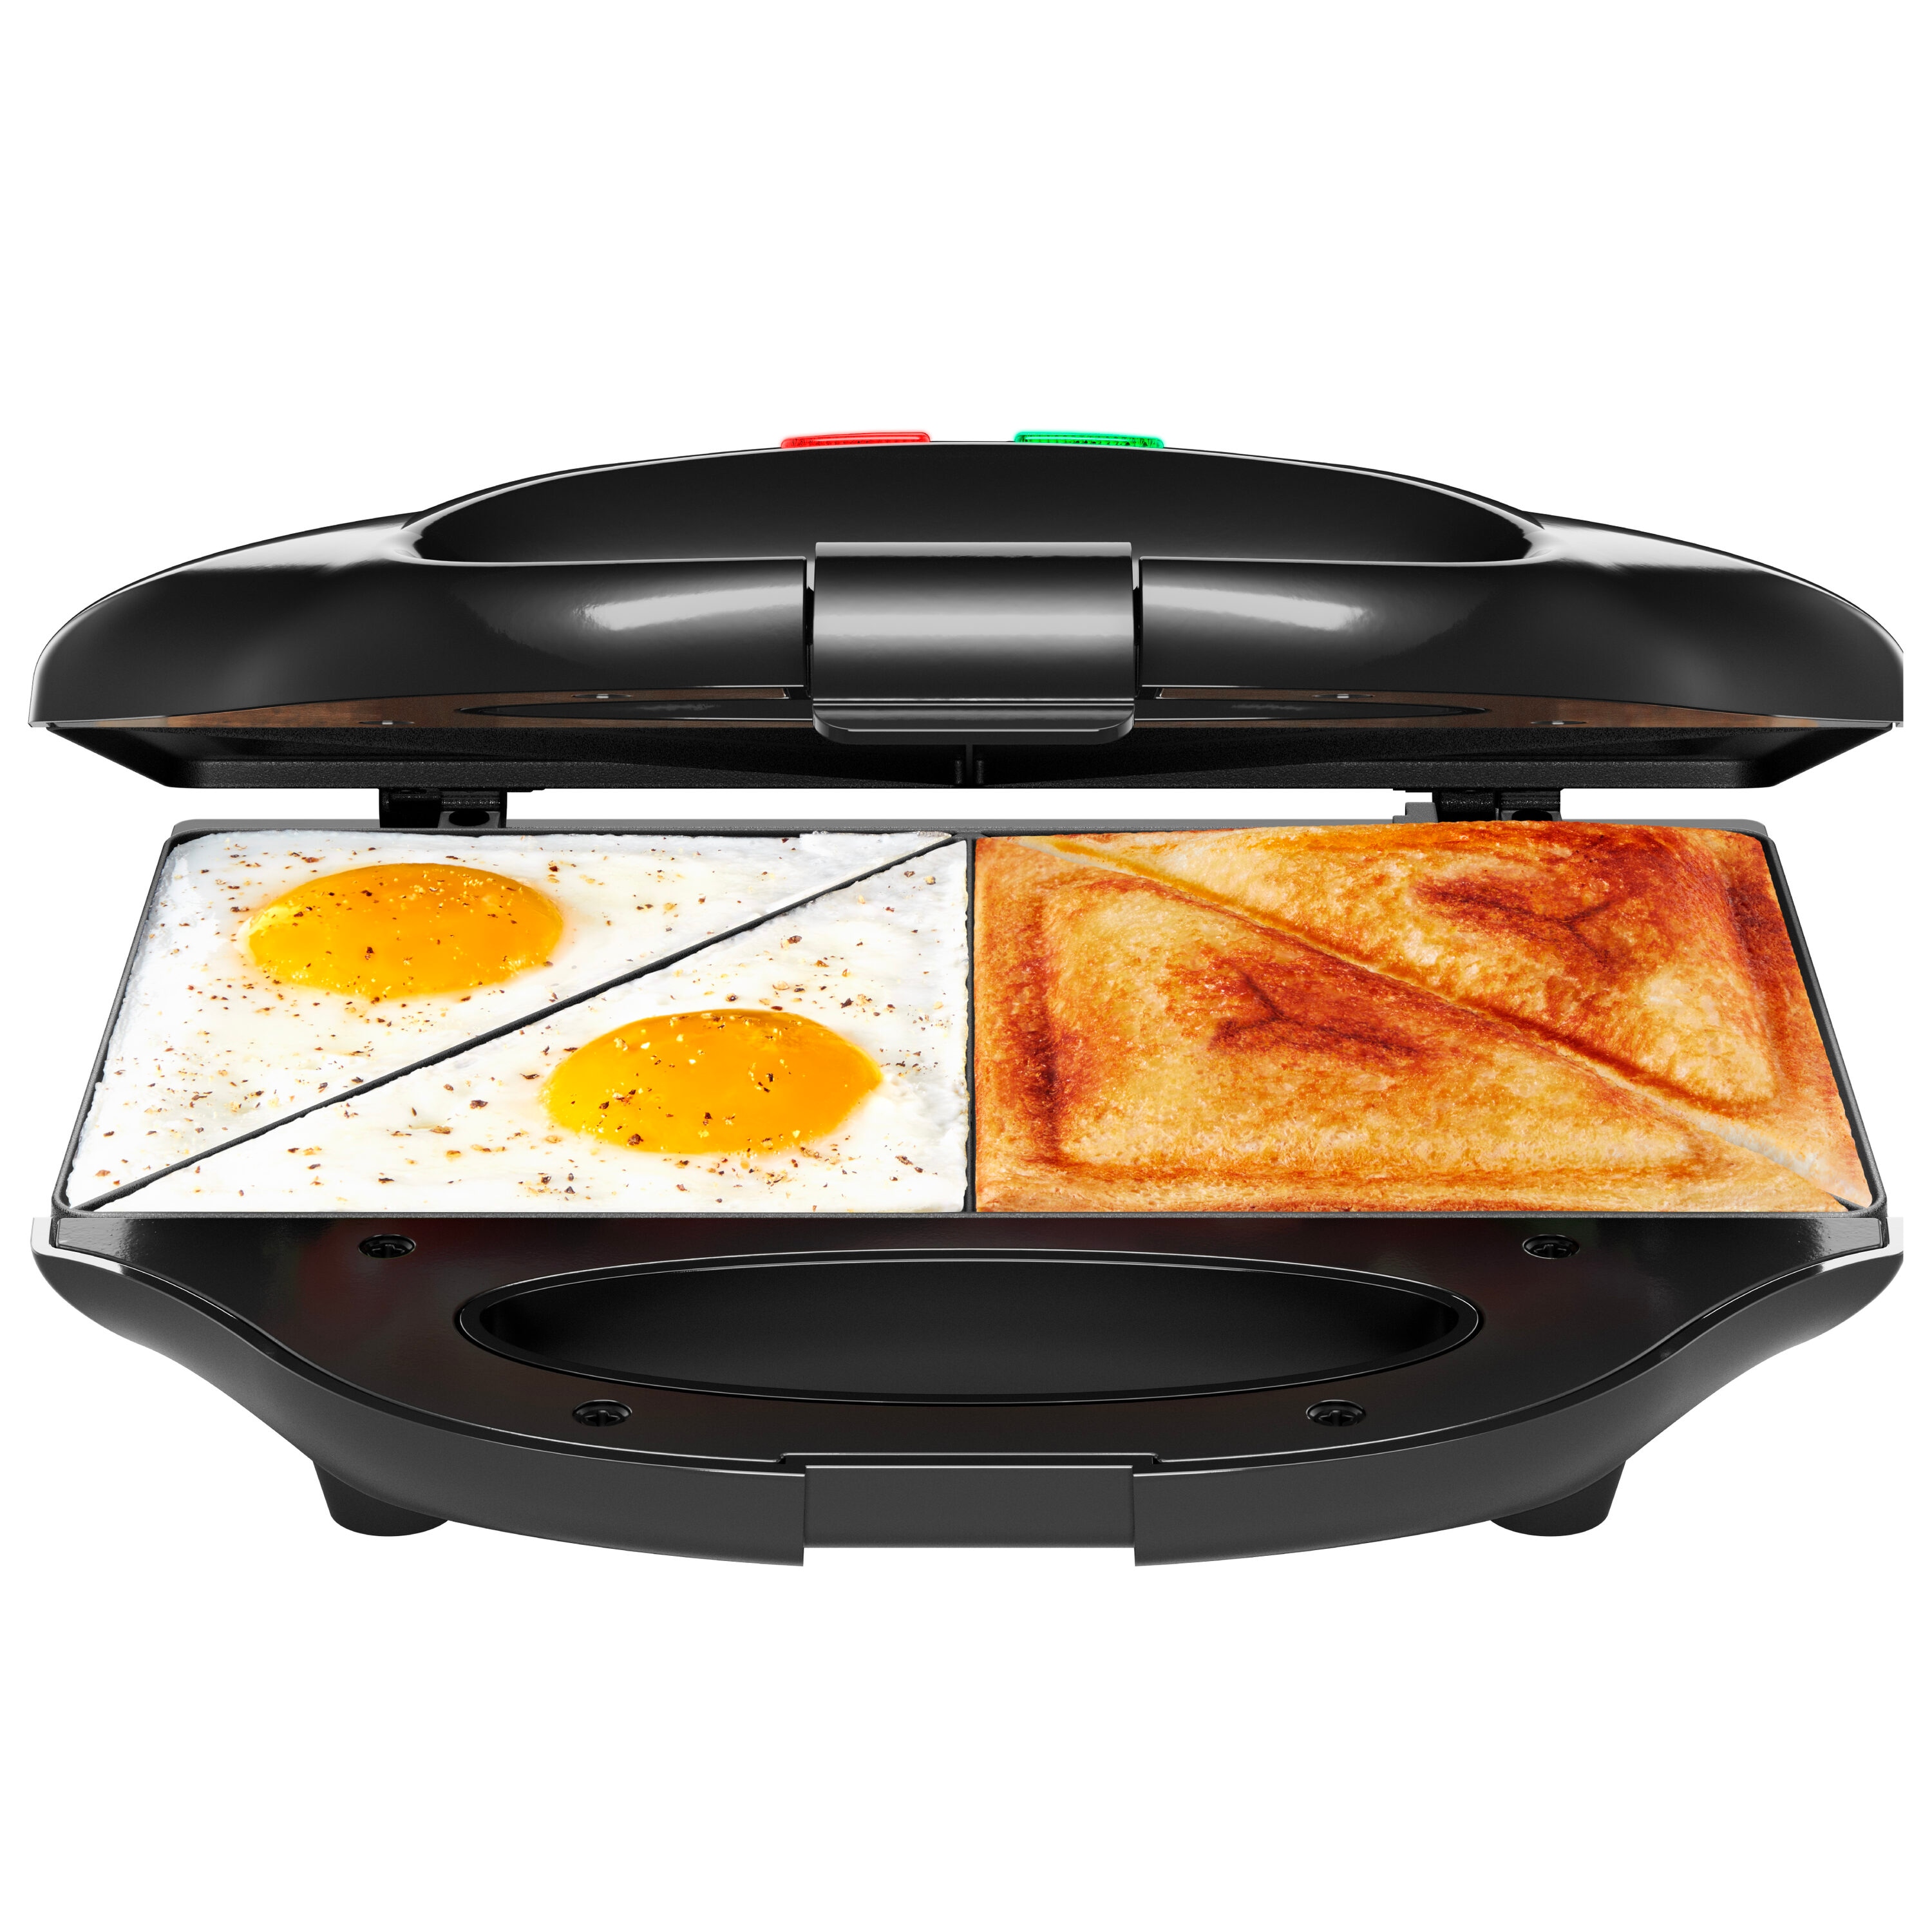 CHEFMAN 8.8-in L x 7.6-in W Non-stick Residential in the Indoor